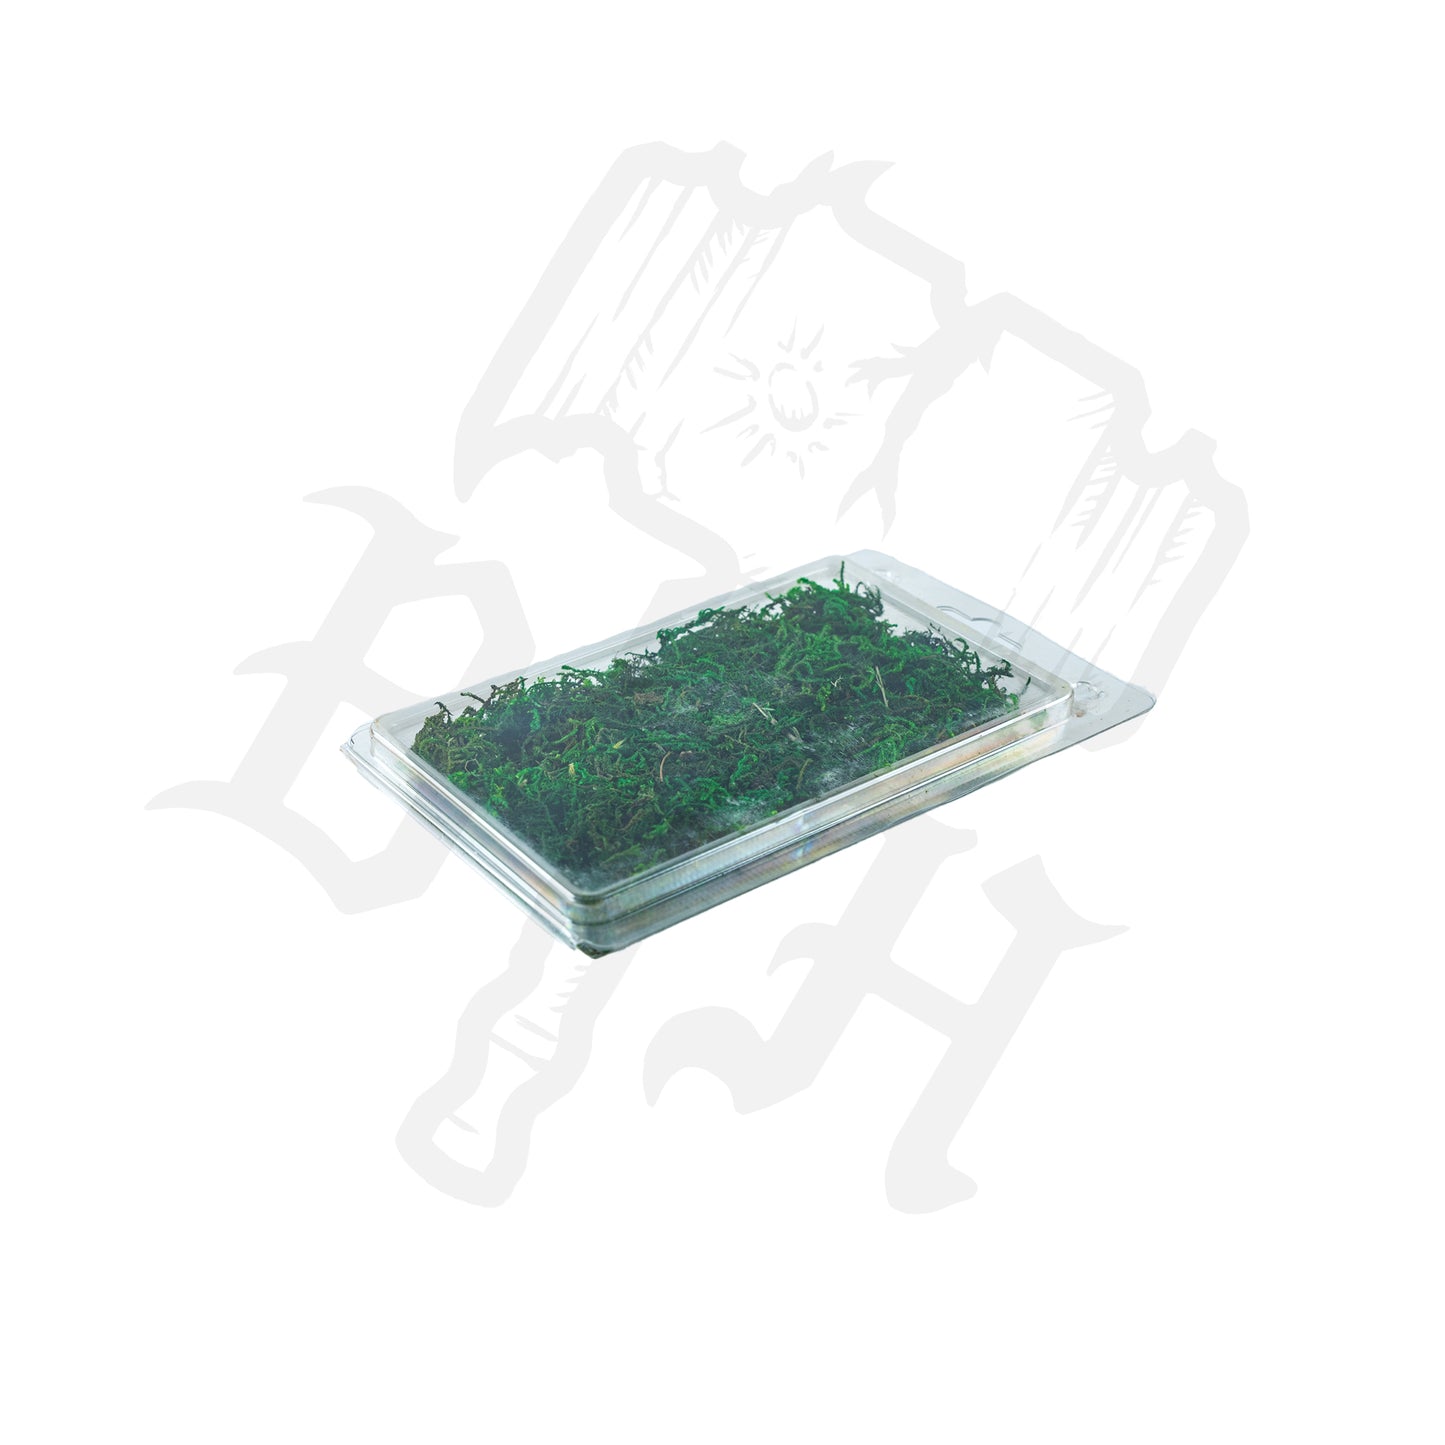 Green Mossy Ground Cover Gaming Grass